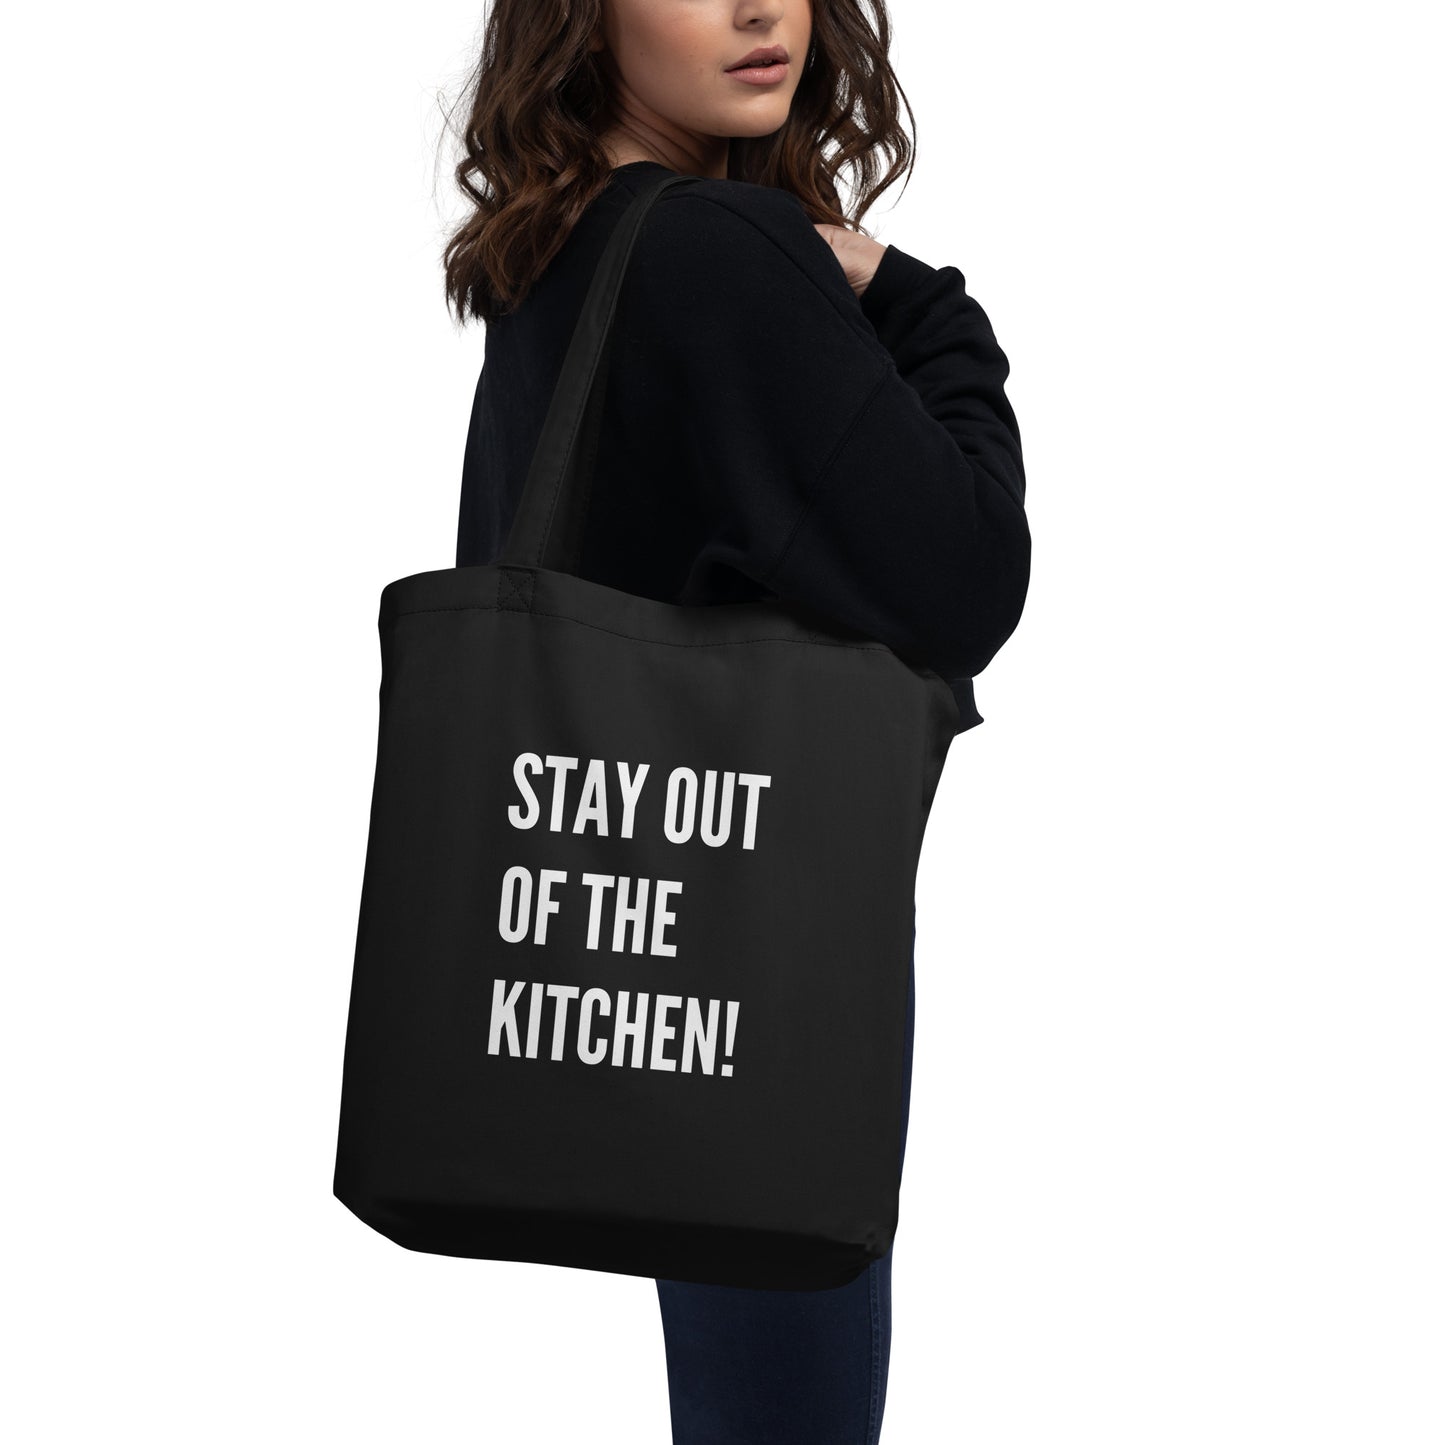 Stay Out of the Kitchen! - Eco Tote Bag